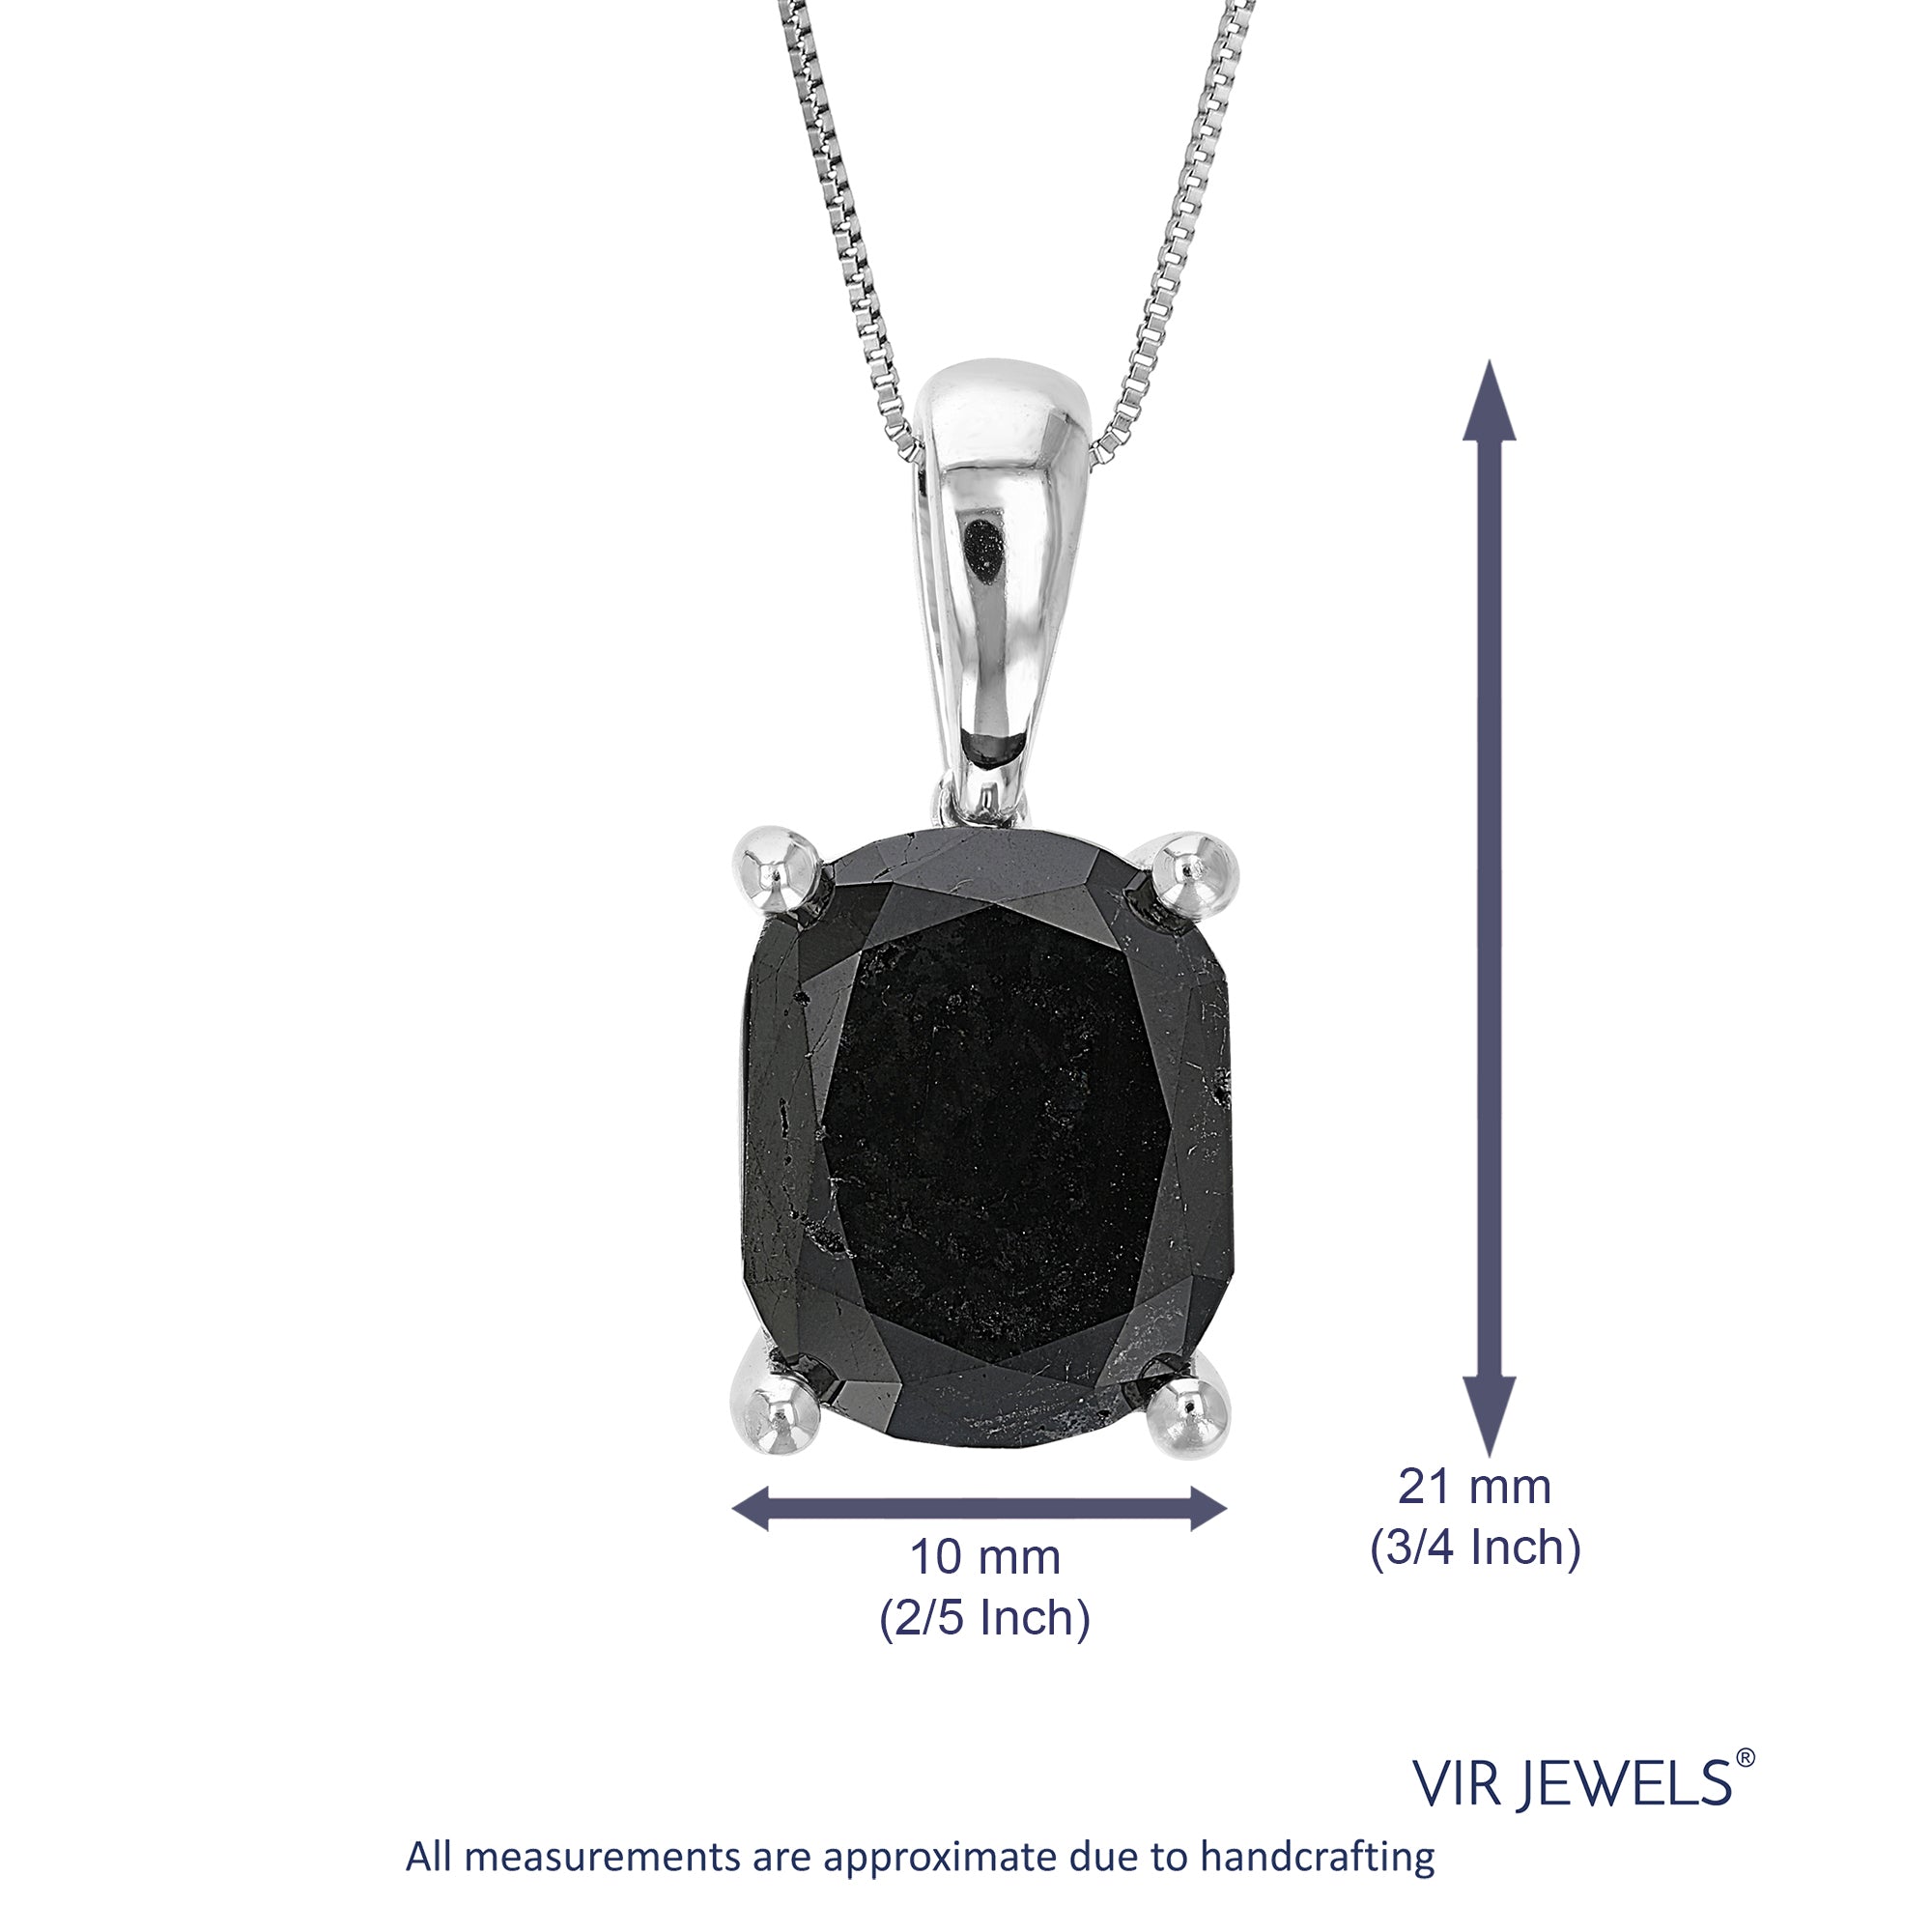 8 cttw Diamond Pendant, Black Diamond Oval Shape Pendant Necklace for Women in .925 Sterling Silver with 18 Inch Chain, Prong Setting